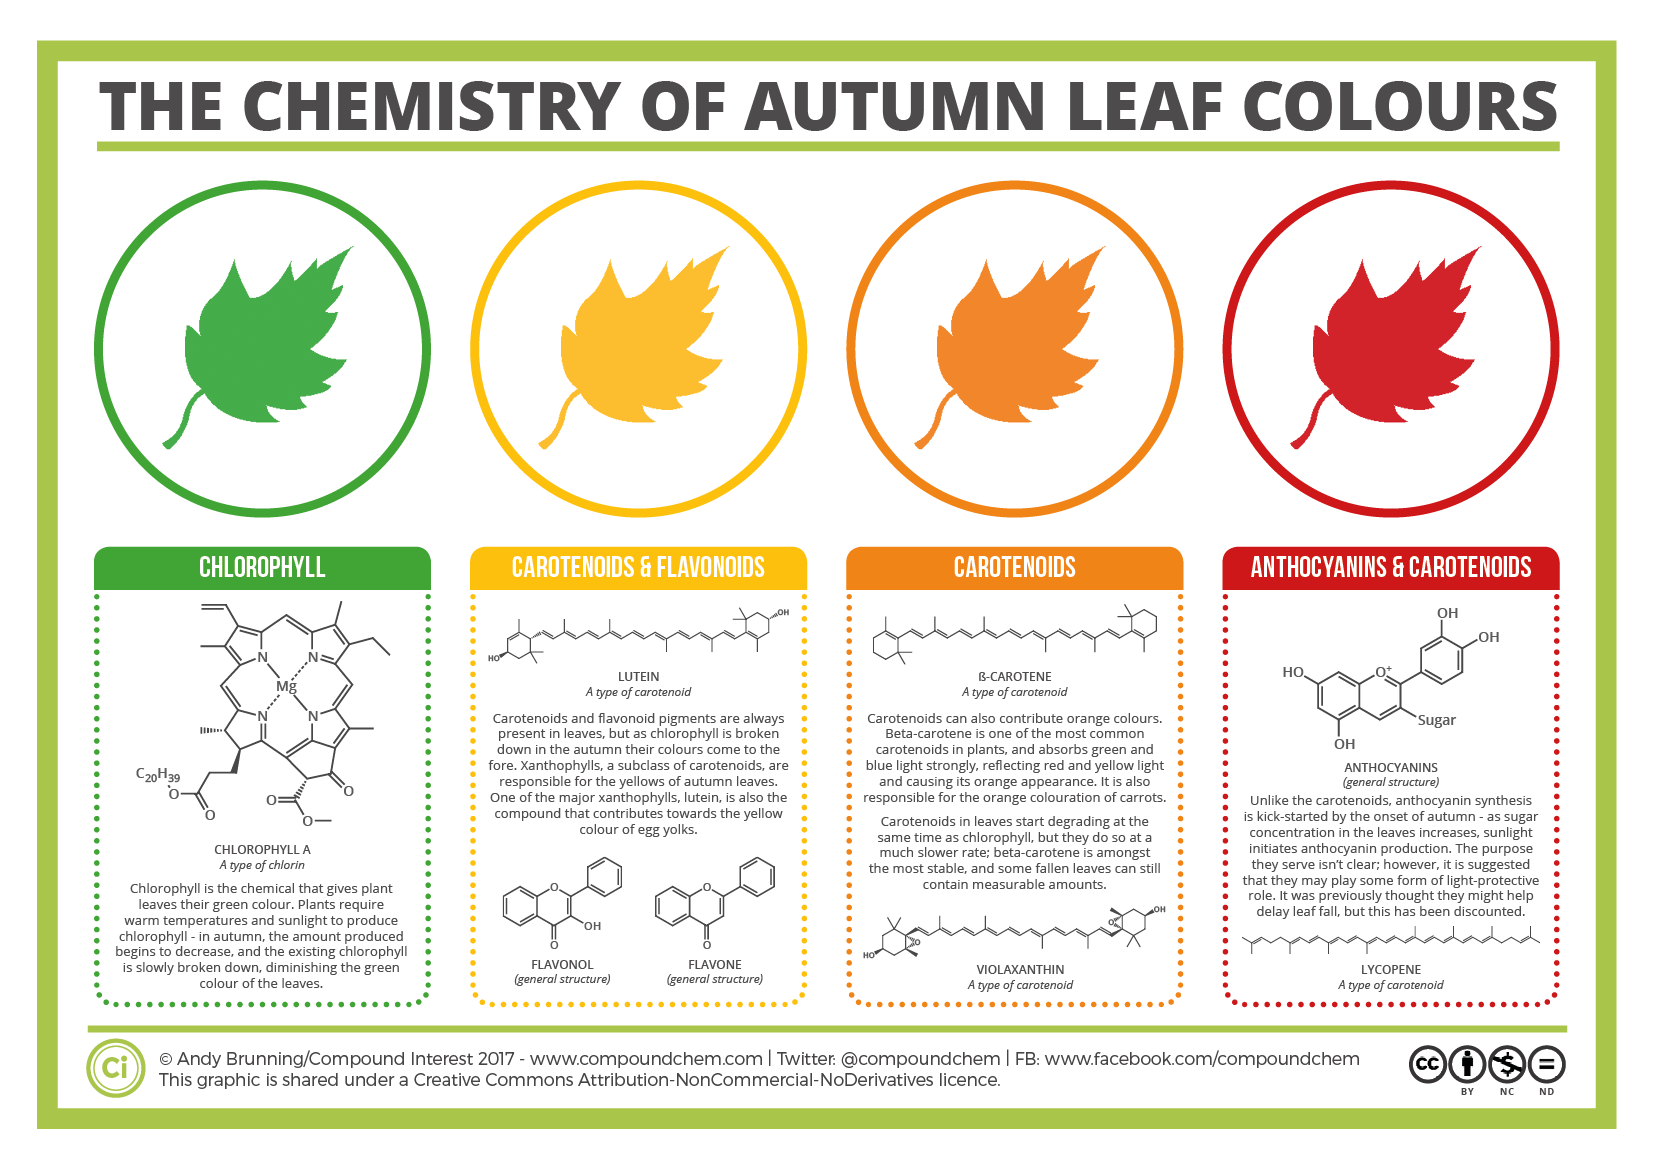 Compound Interest - The Chemicals Behind the Colours of Autumn Leaves